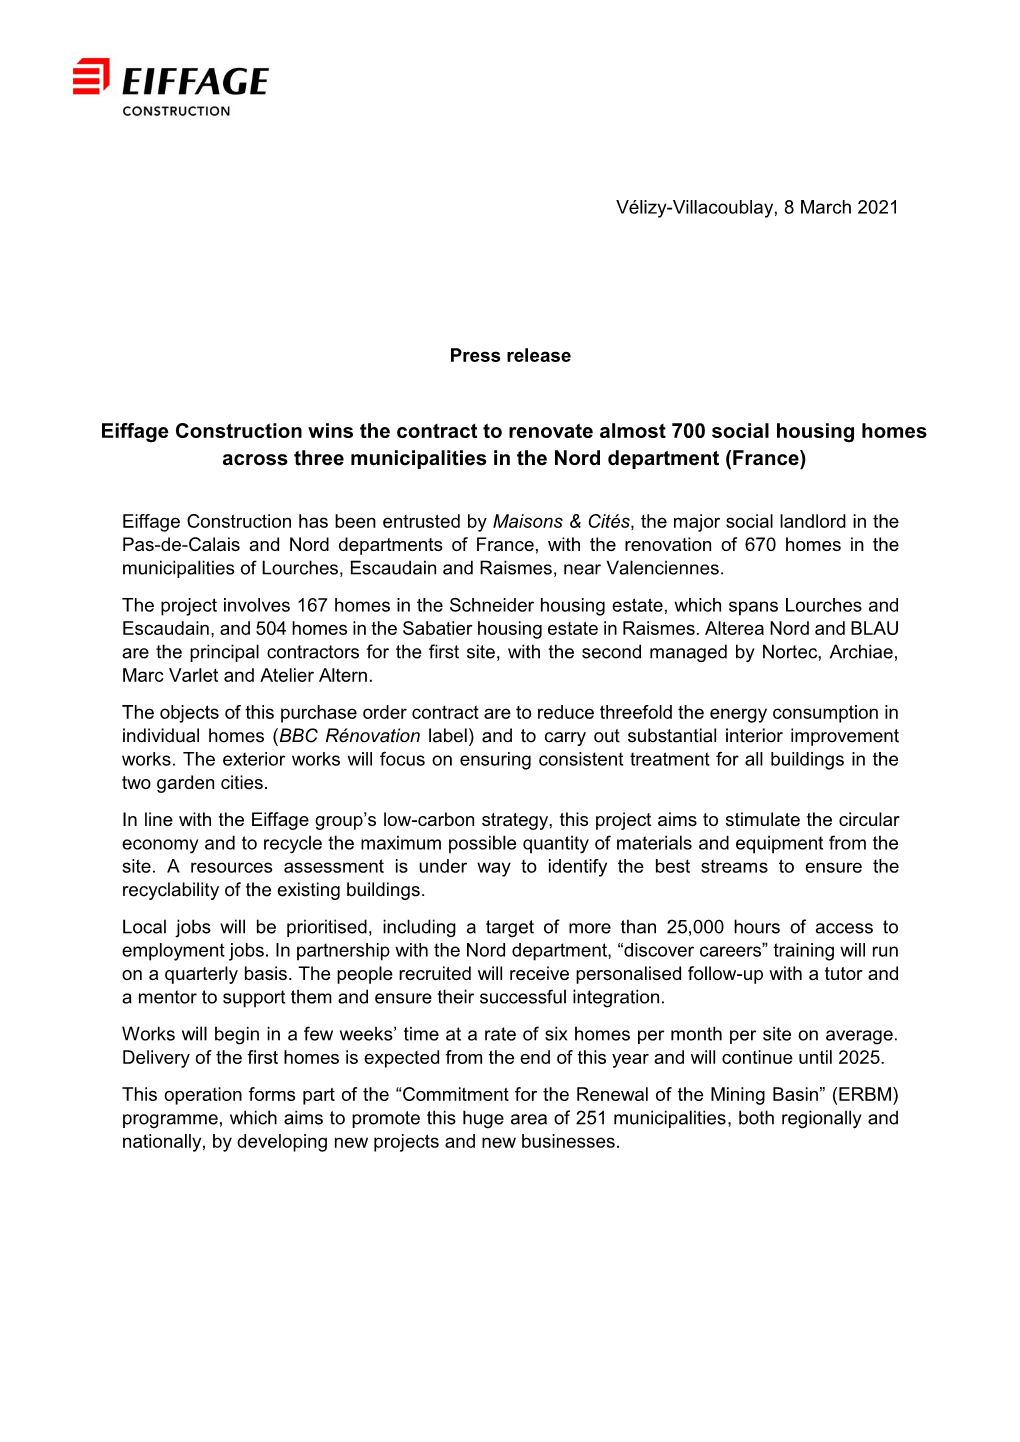 09.03.2021 Press Release Eiffage Construction Wins the Contract To